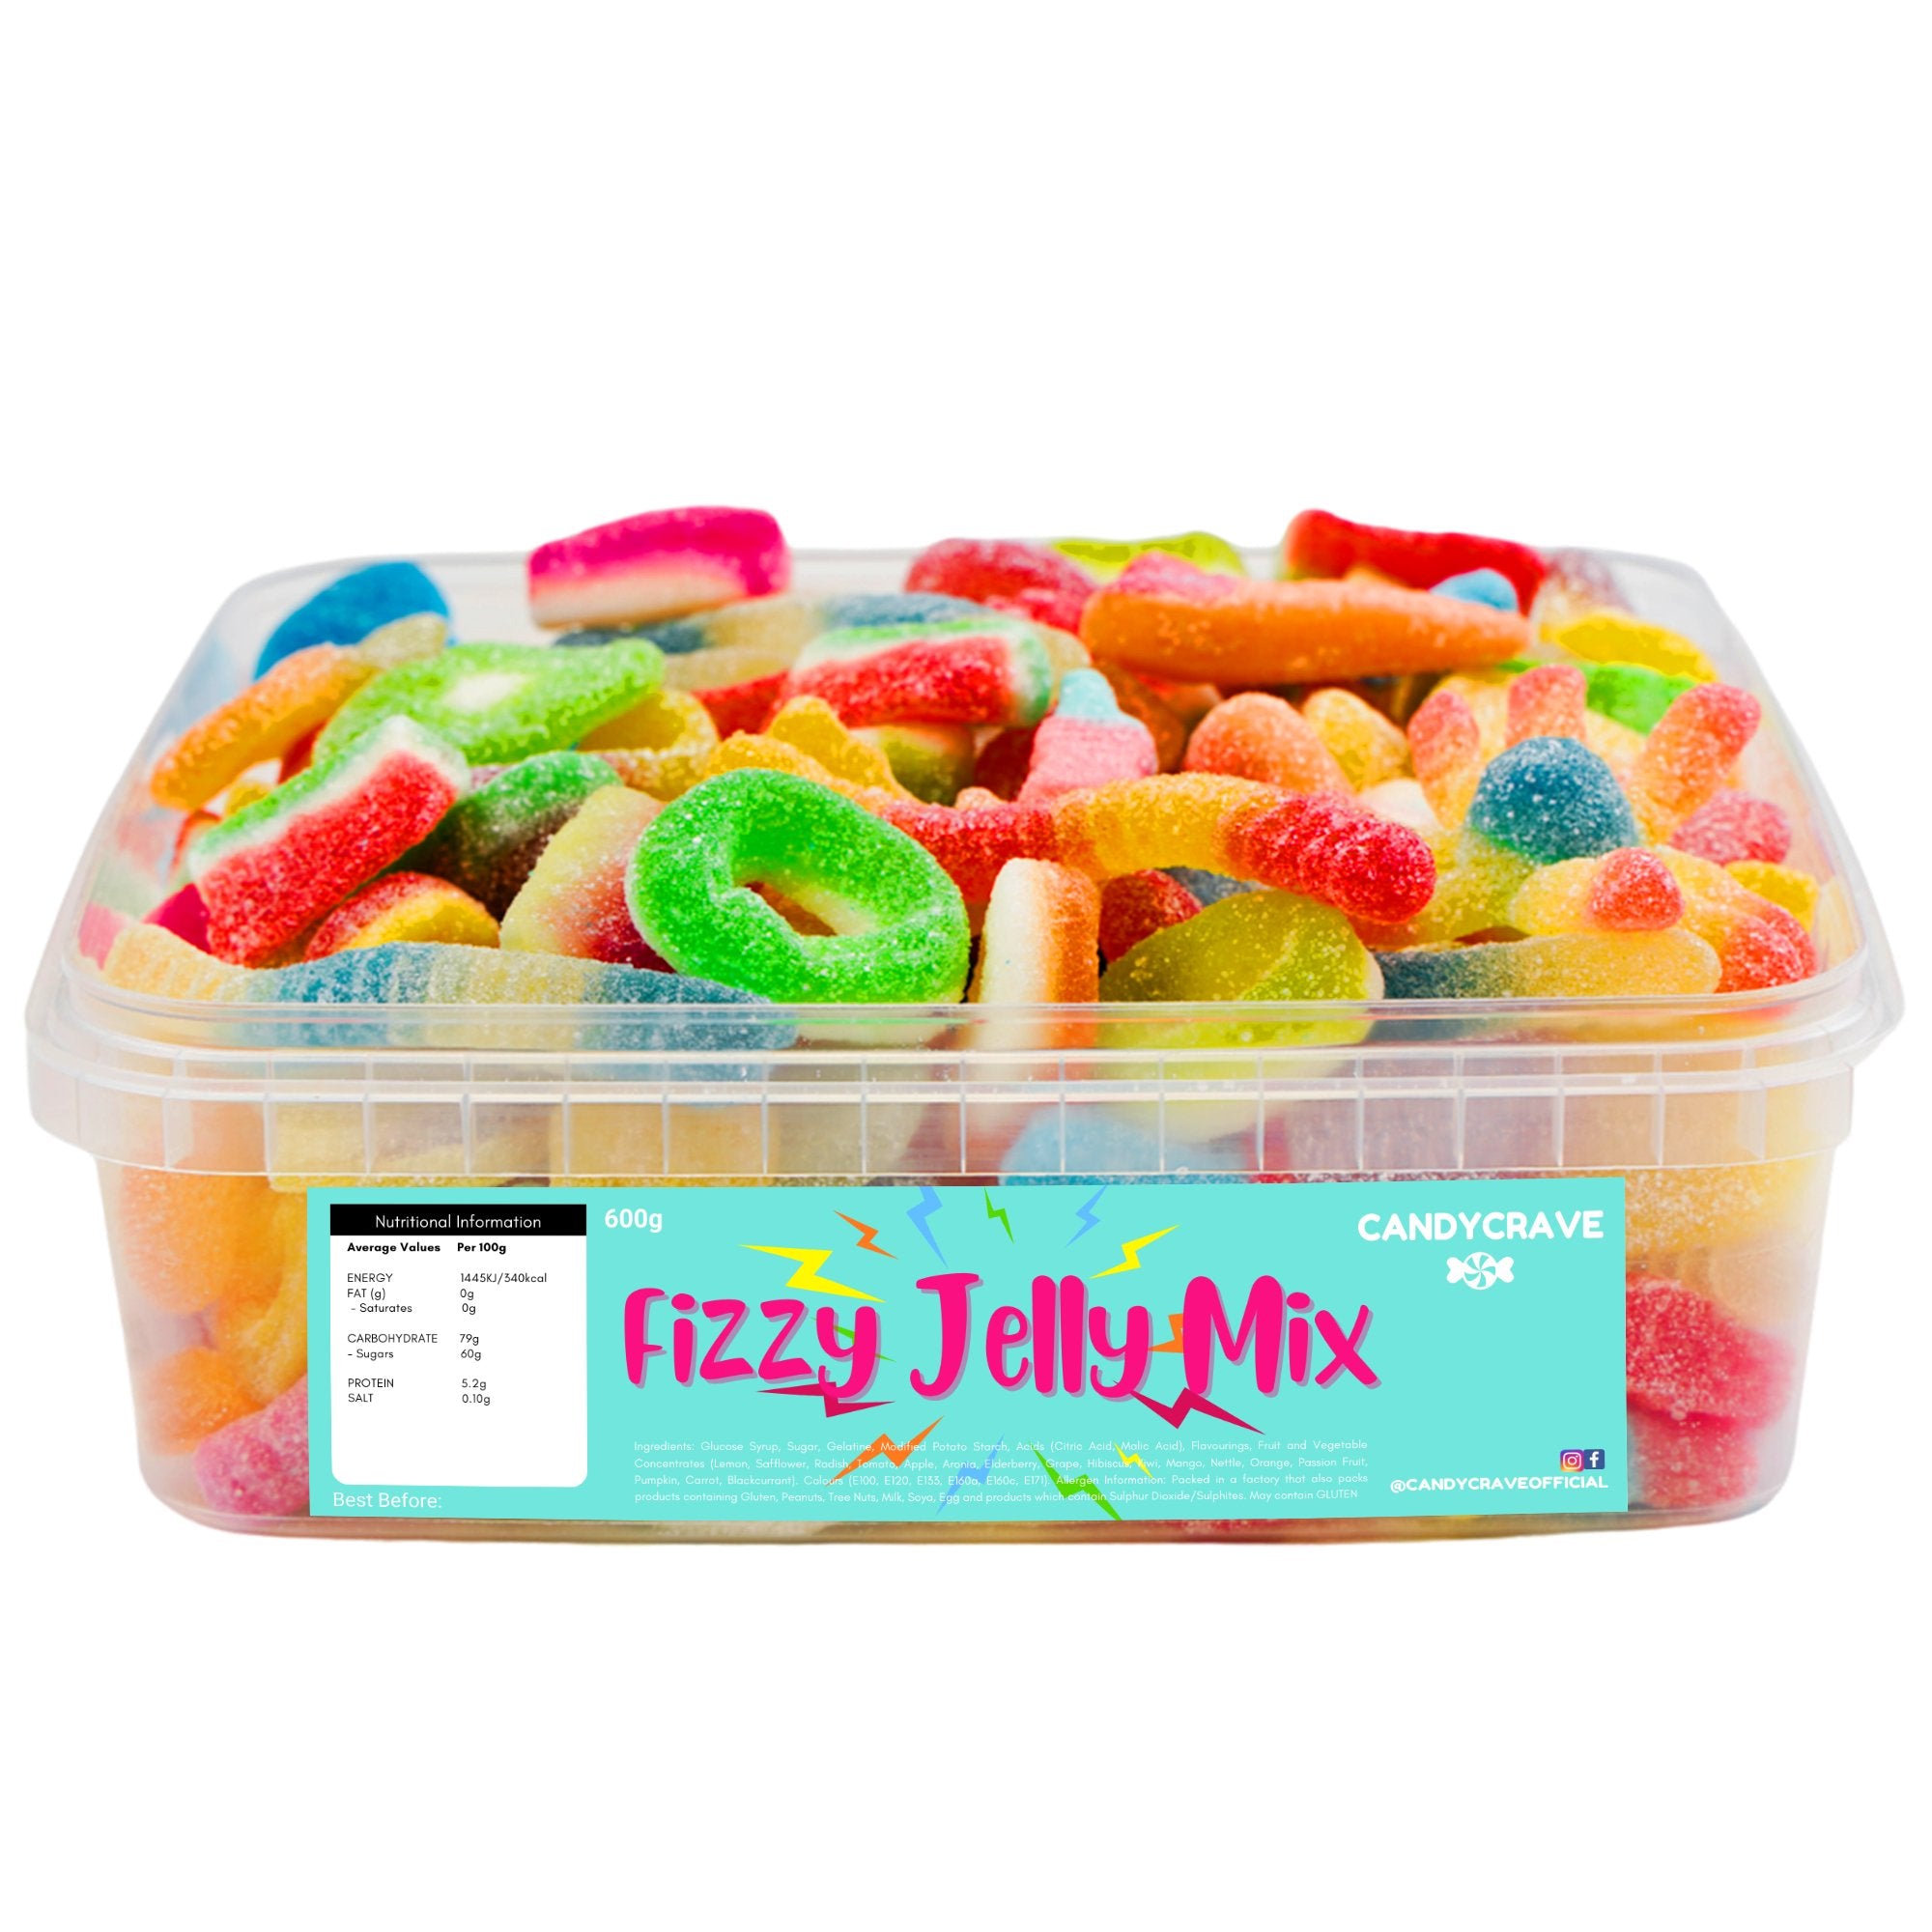 Candy Crave Fizzy Jelly Mix Tub 600g - Jessica's Sweets